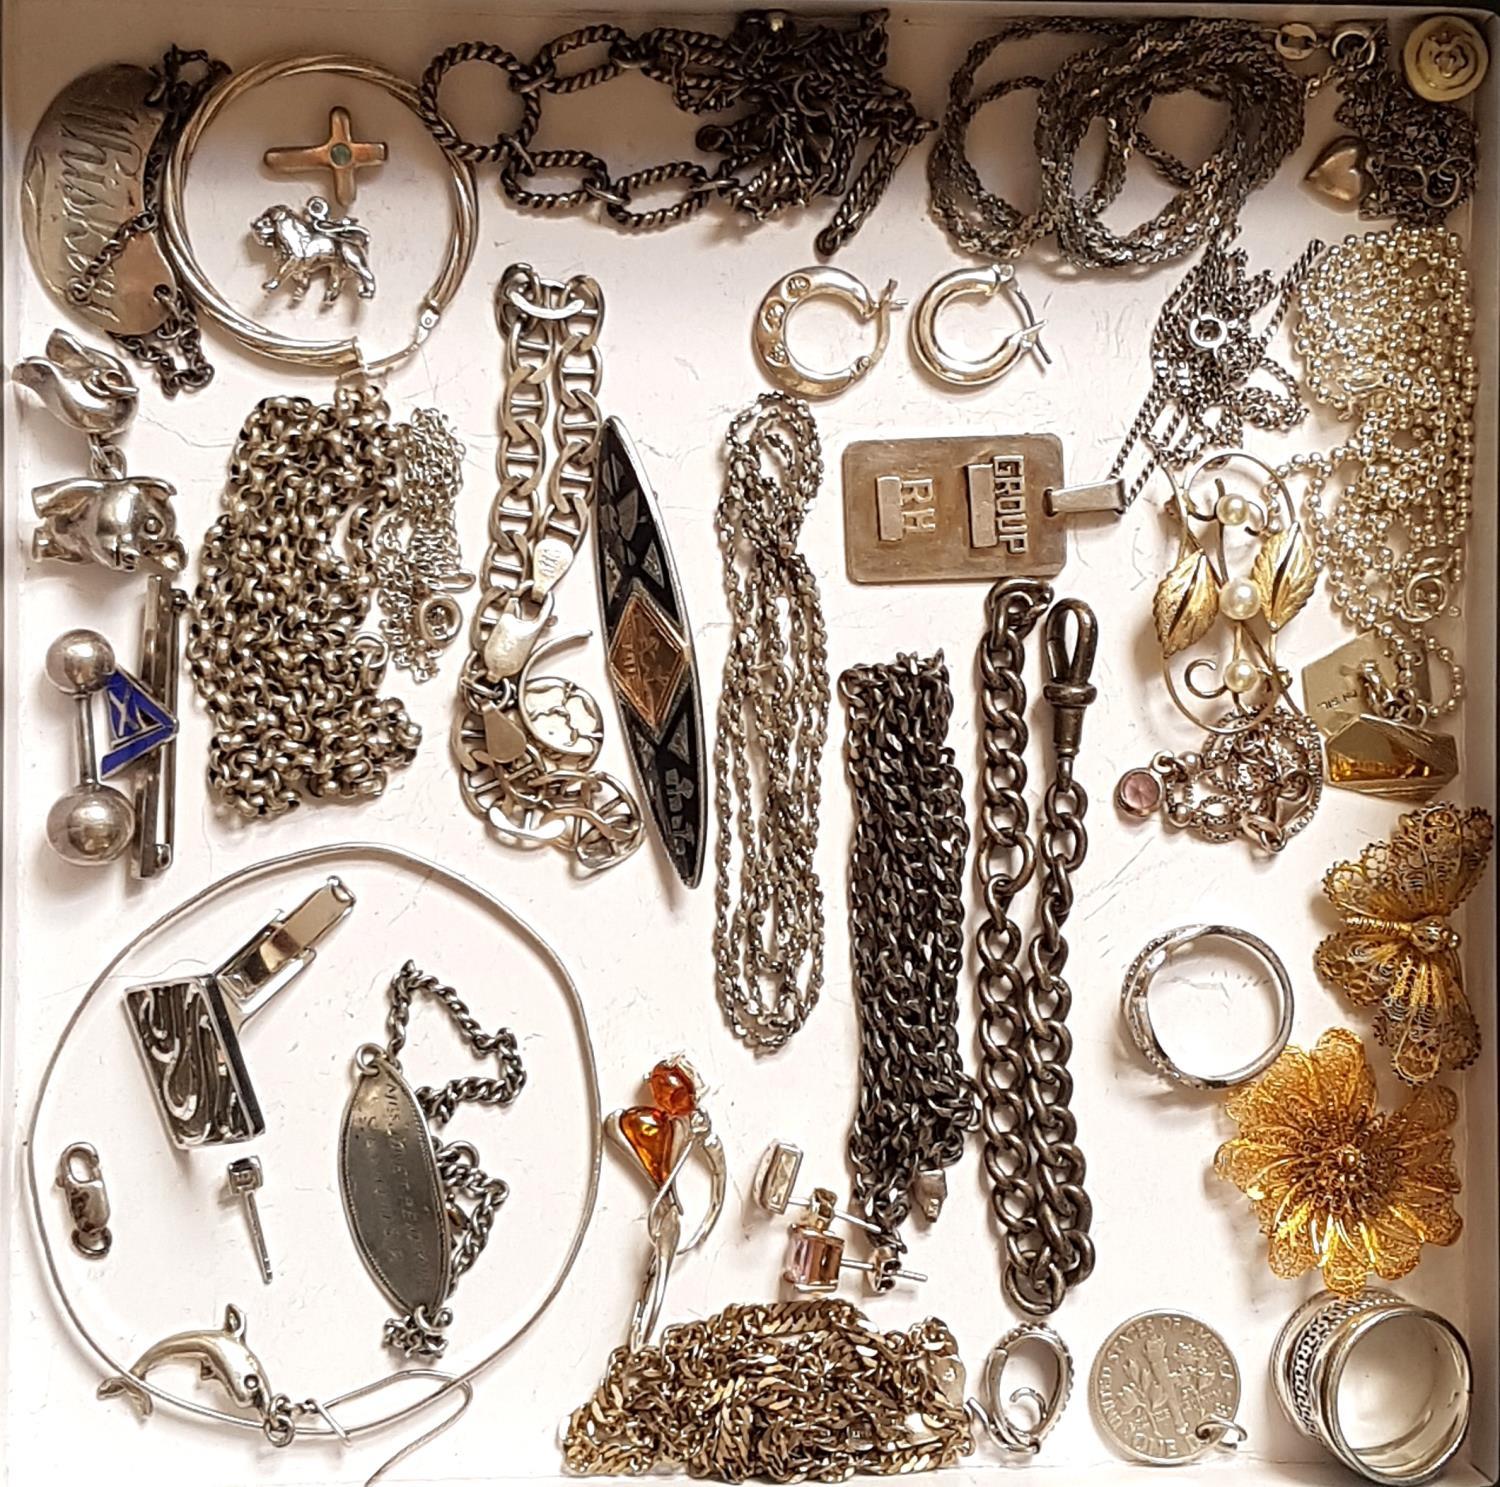 SELECTION OF SILVER JEWELLERY including a niello style brooch with gold detail, a filgree